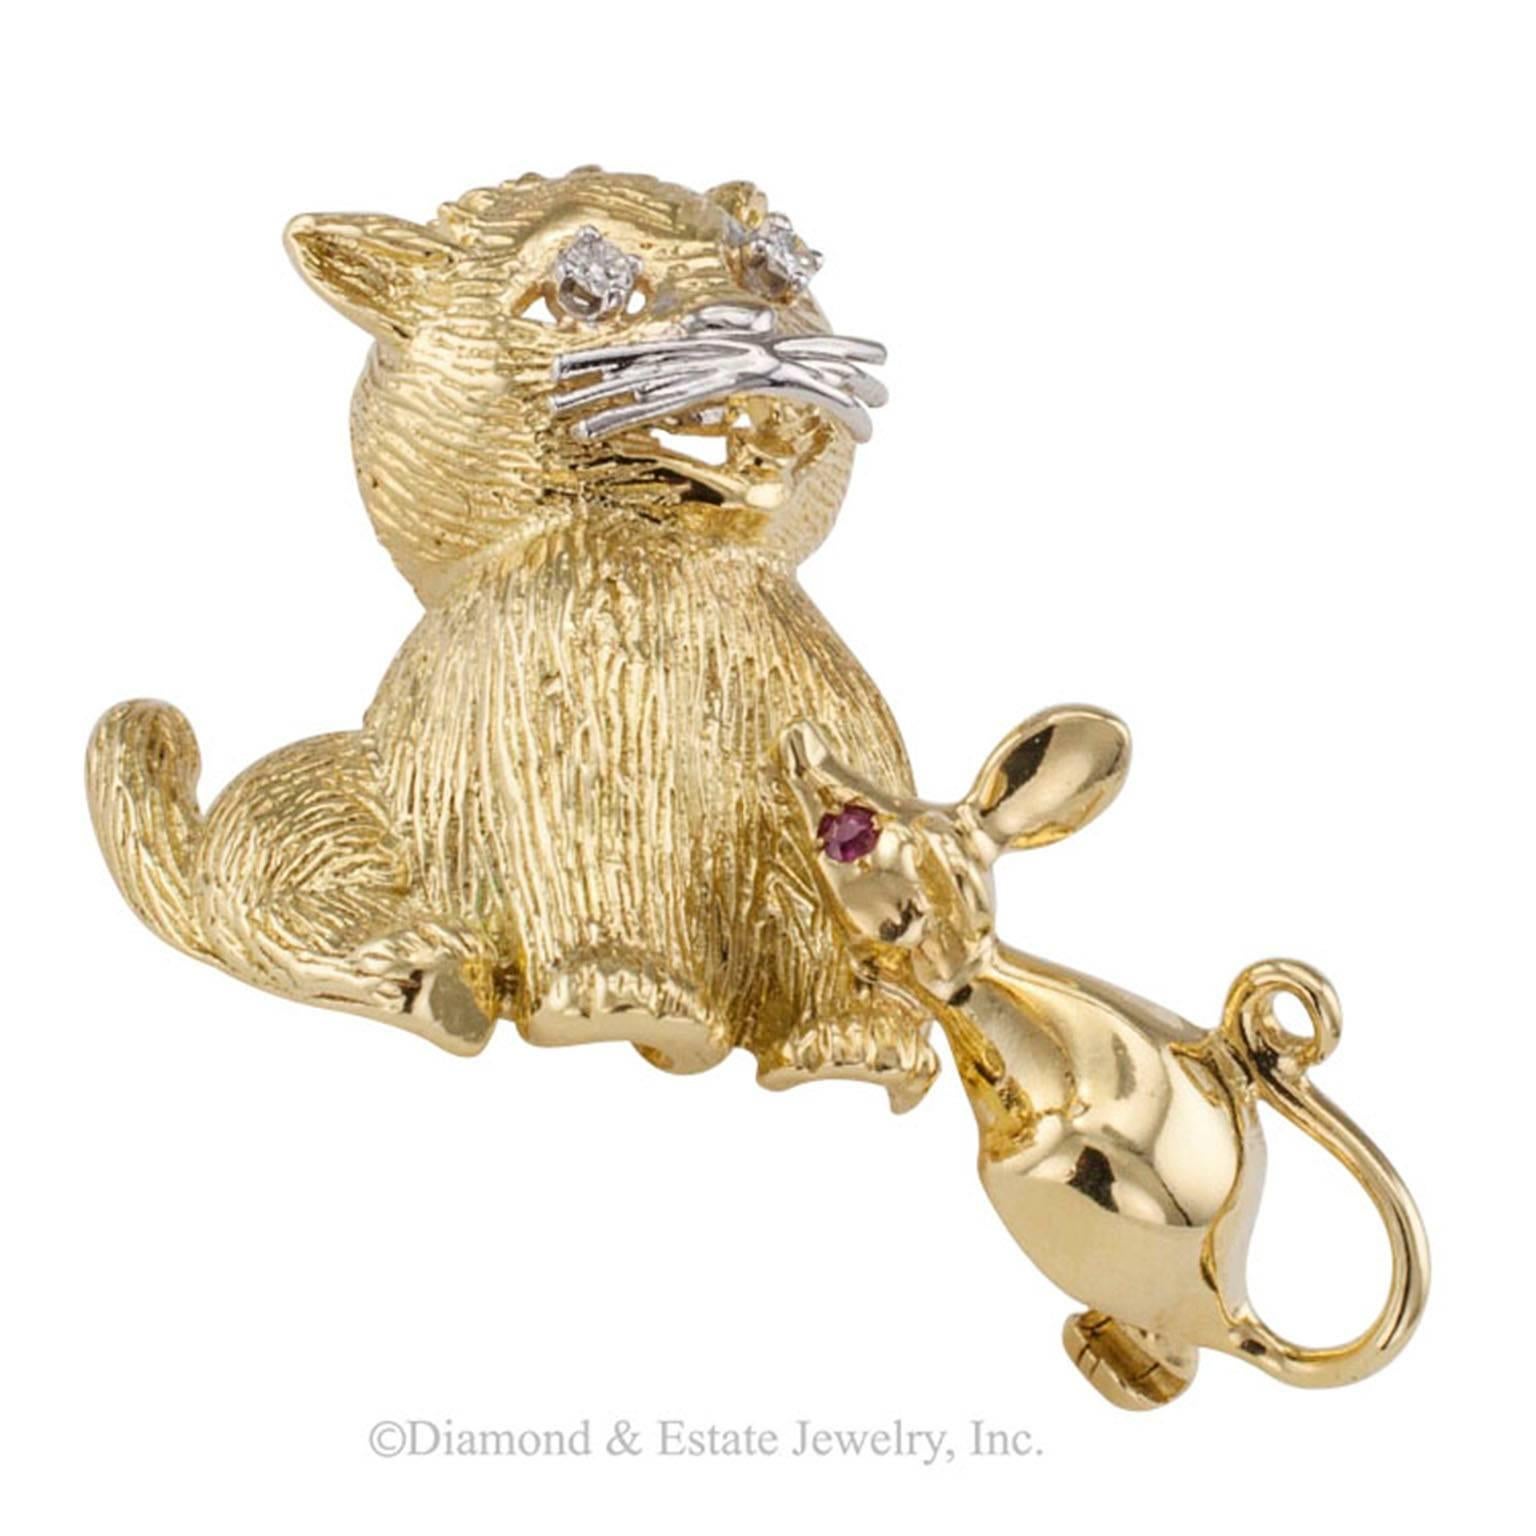 1960s Cat Mouse Ruby Diamond Gold Brooch

Cat and mouse gold brooch with diamonds and rubies circa 1960.  Seemingly a peaceful and harmonious tete a tete between cat and mouse... with stars in its eyes... the cat... looking quite smug... silently